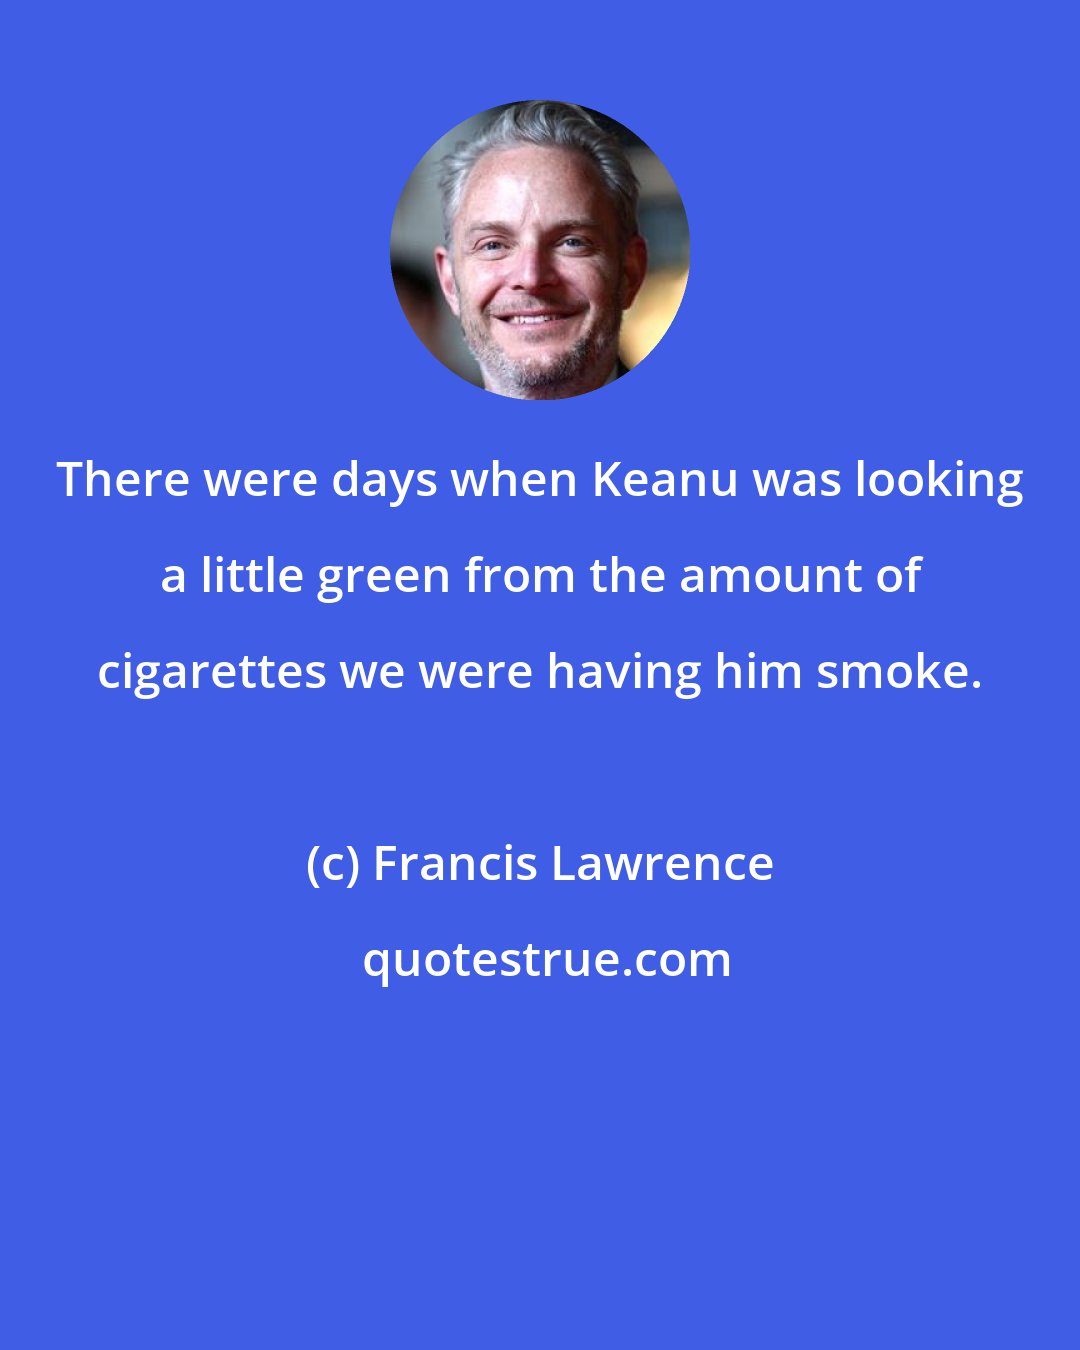 Francis Lawrence: There were days when Keanu was looking a little green from the amount of cigarettes we were having him smoke.